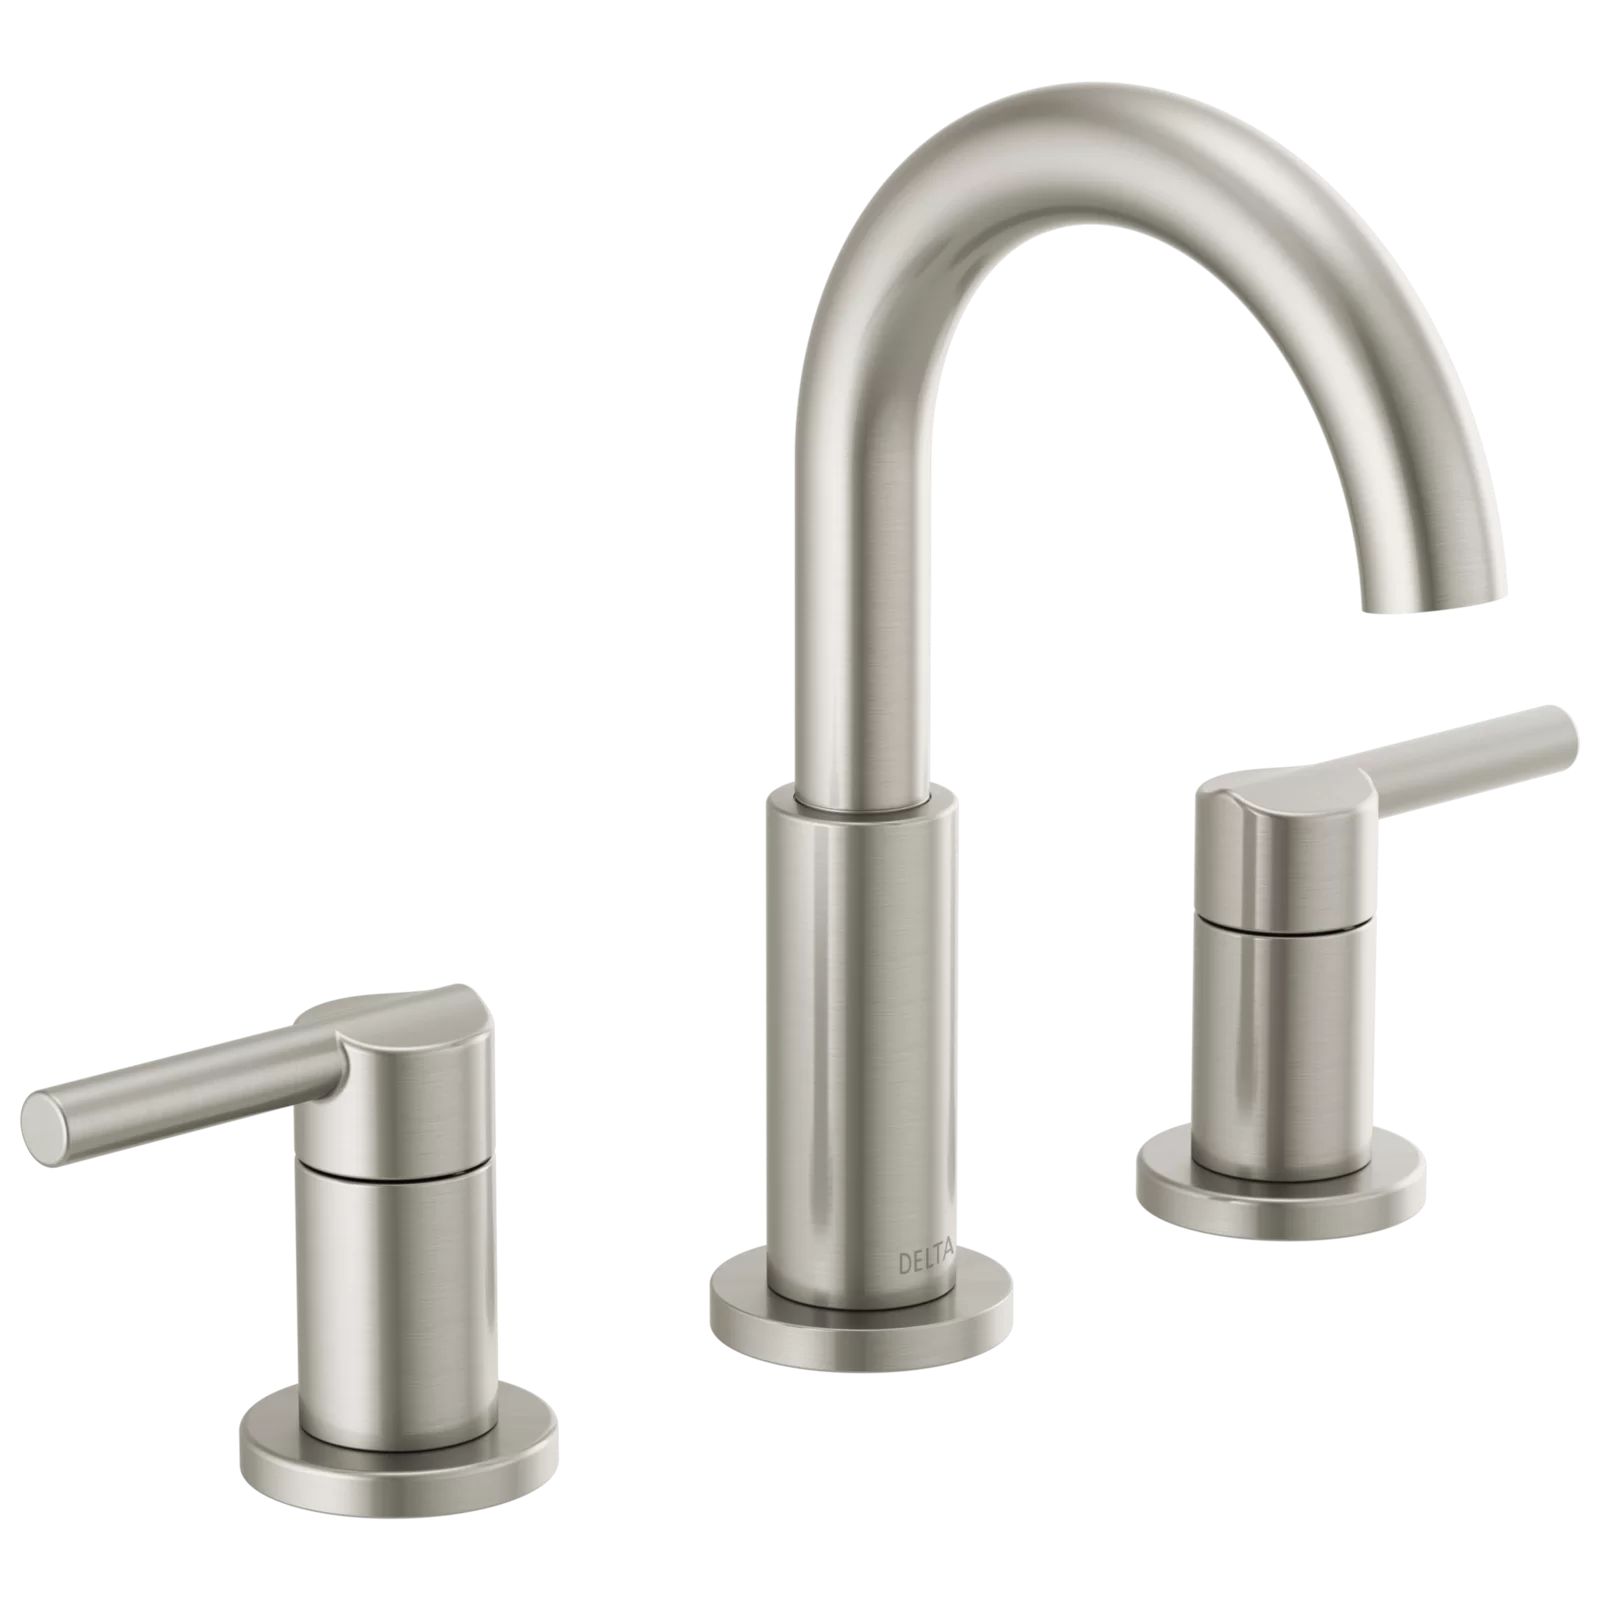 35749LF-SS Nicoli Widespread Bathroom Faucet with Drain Assembly | Wayfair North America